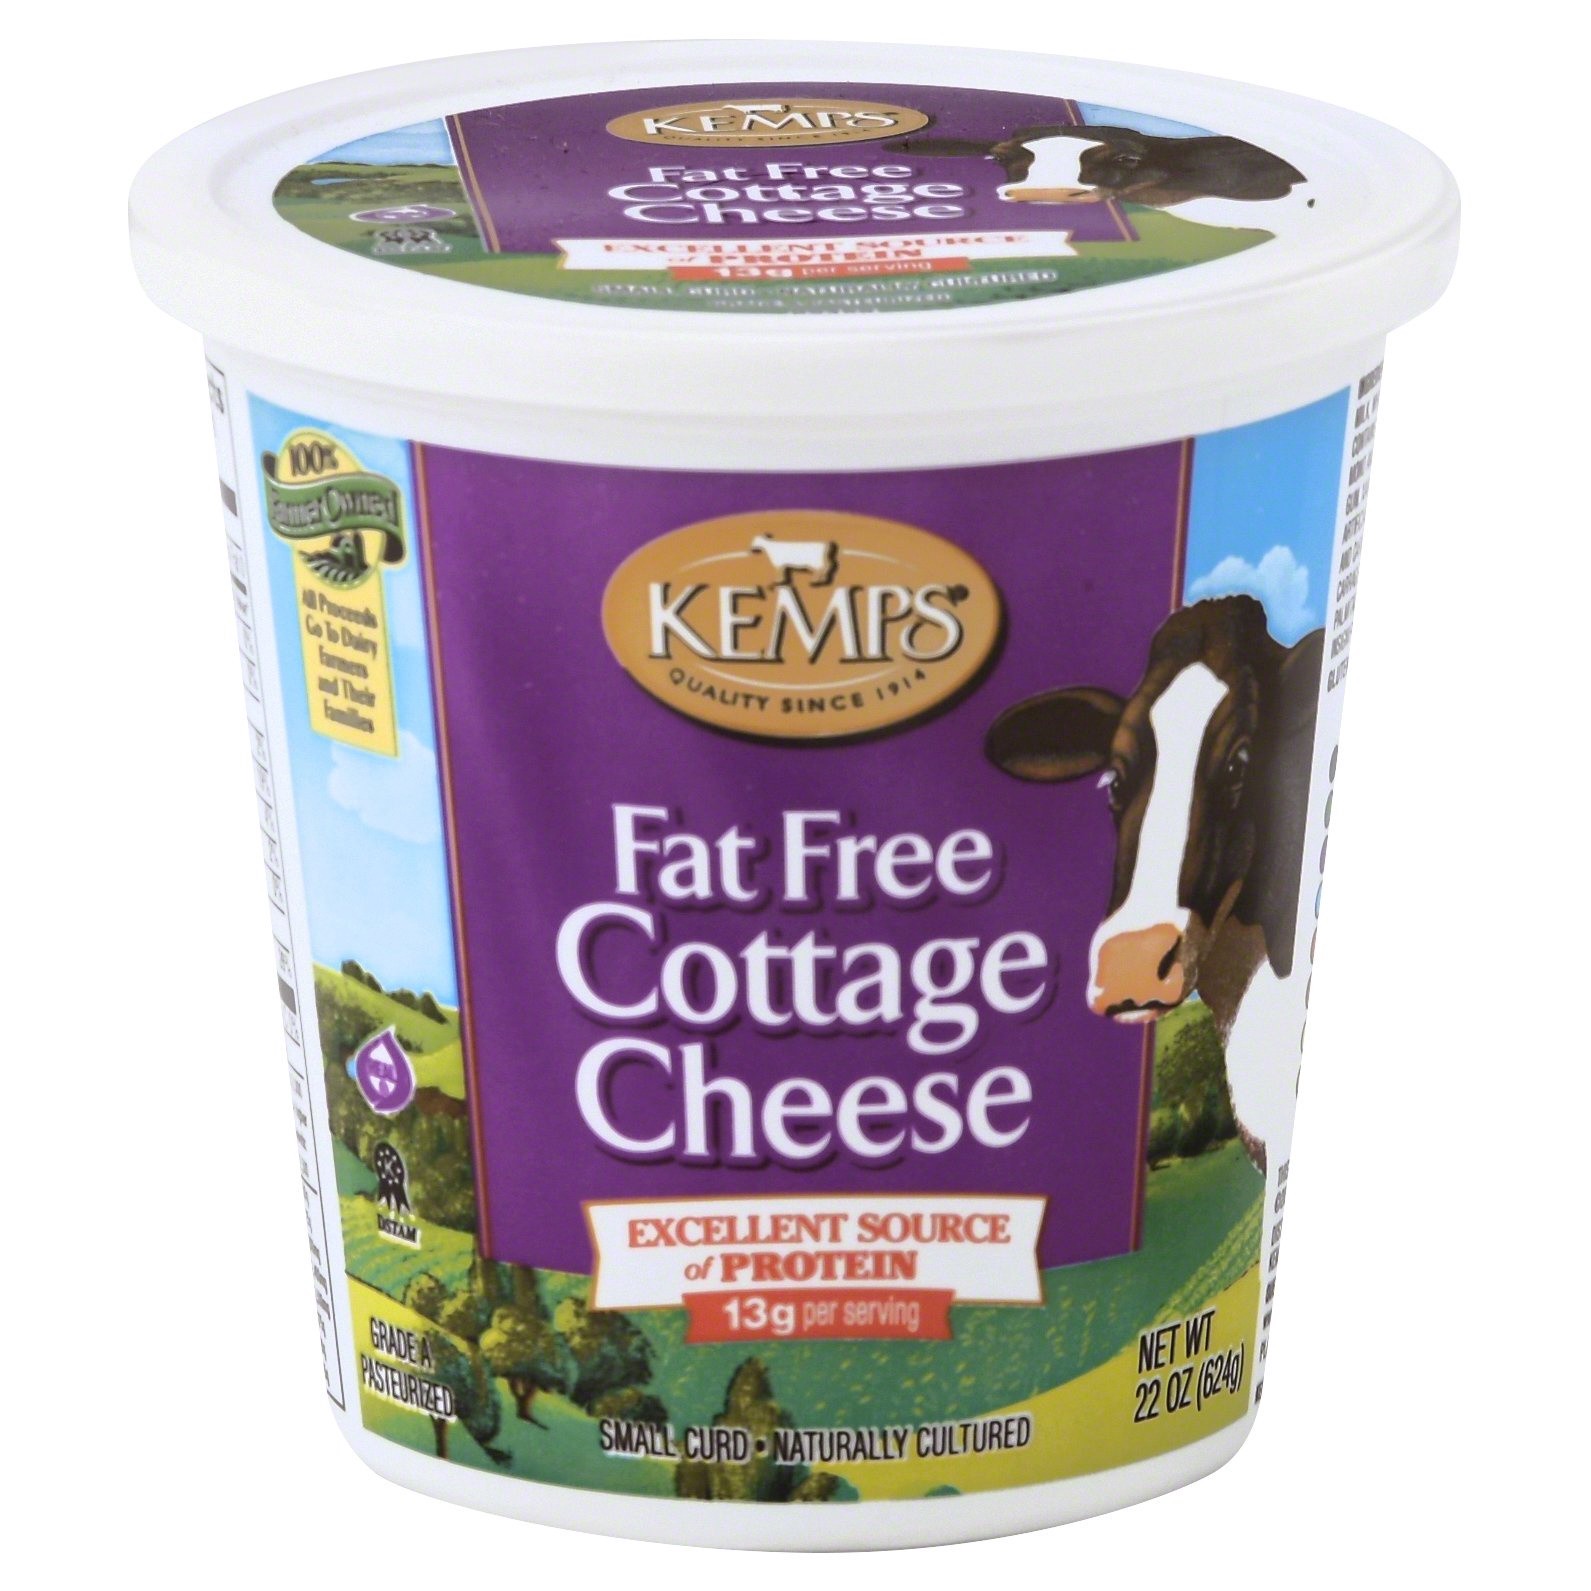 slide 1 of 6, Kemps Fat Free Cottage Cheese, 22 oz